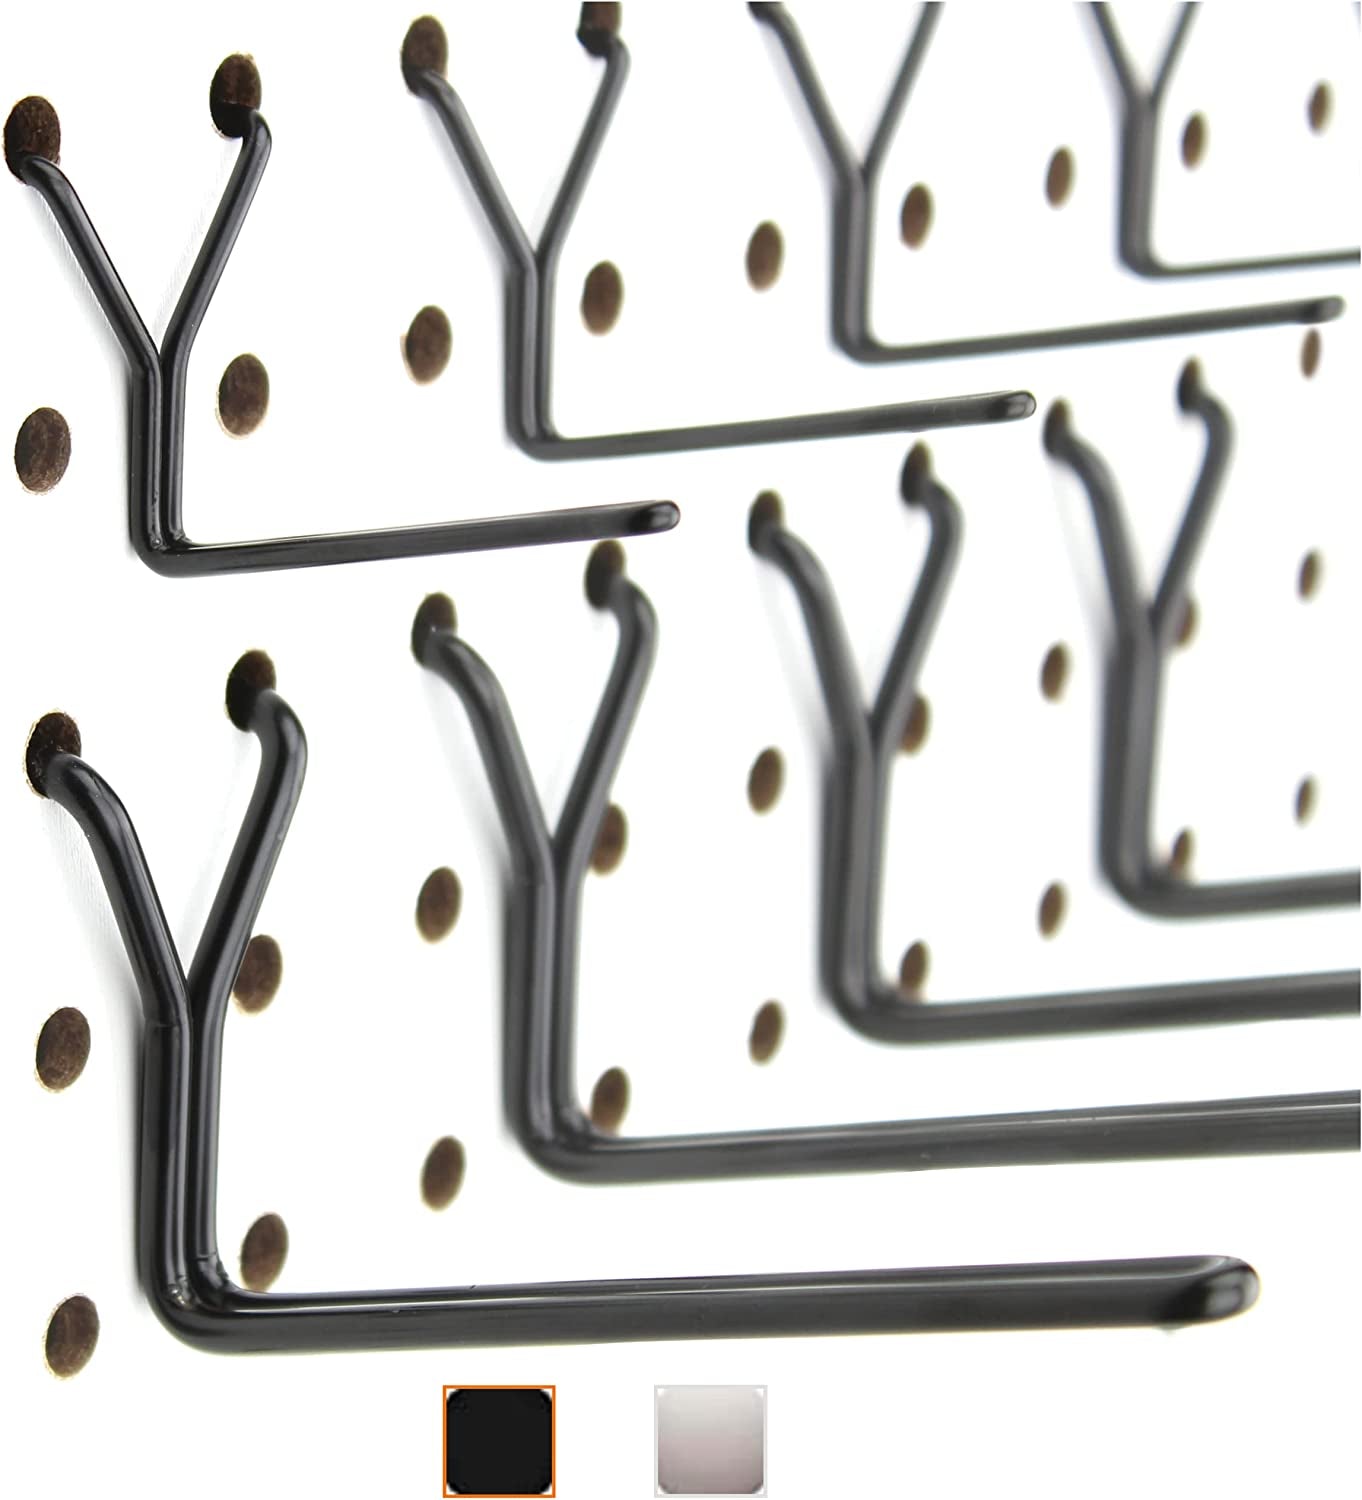 Right Arrange, Metal Pegboard Hooks 50-Pack 2" + 4” L Hook - Will Not Fall Out - Fits Any Peg Board - Black - Organize Tools, Accessories, Workbench, Garage Storage, Kitchen, Craft or Hobby Supplies, Jewelry